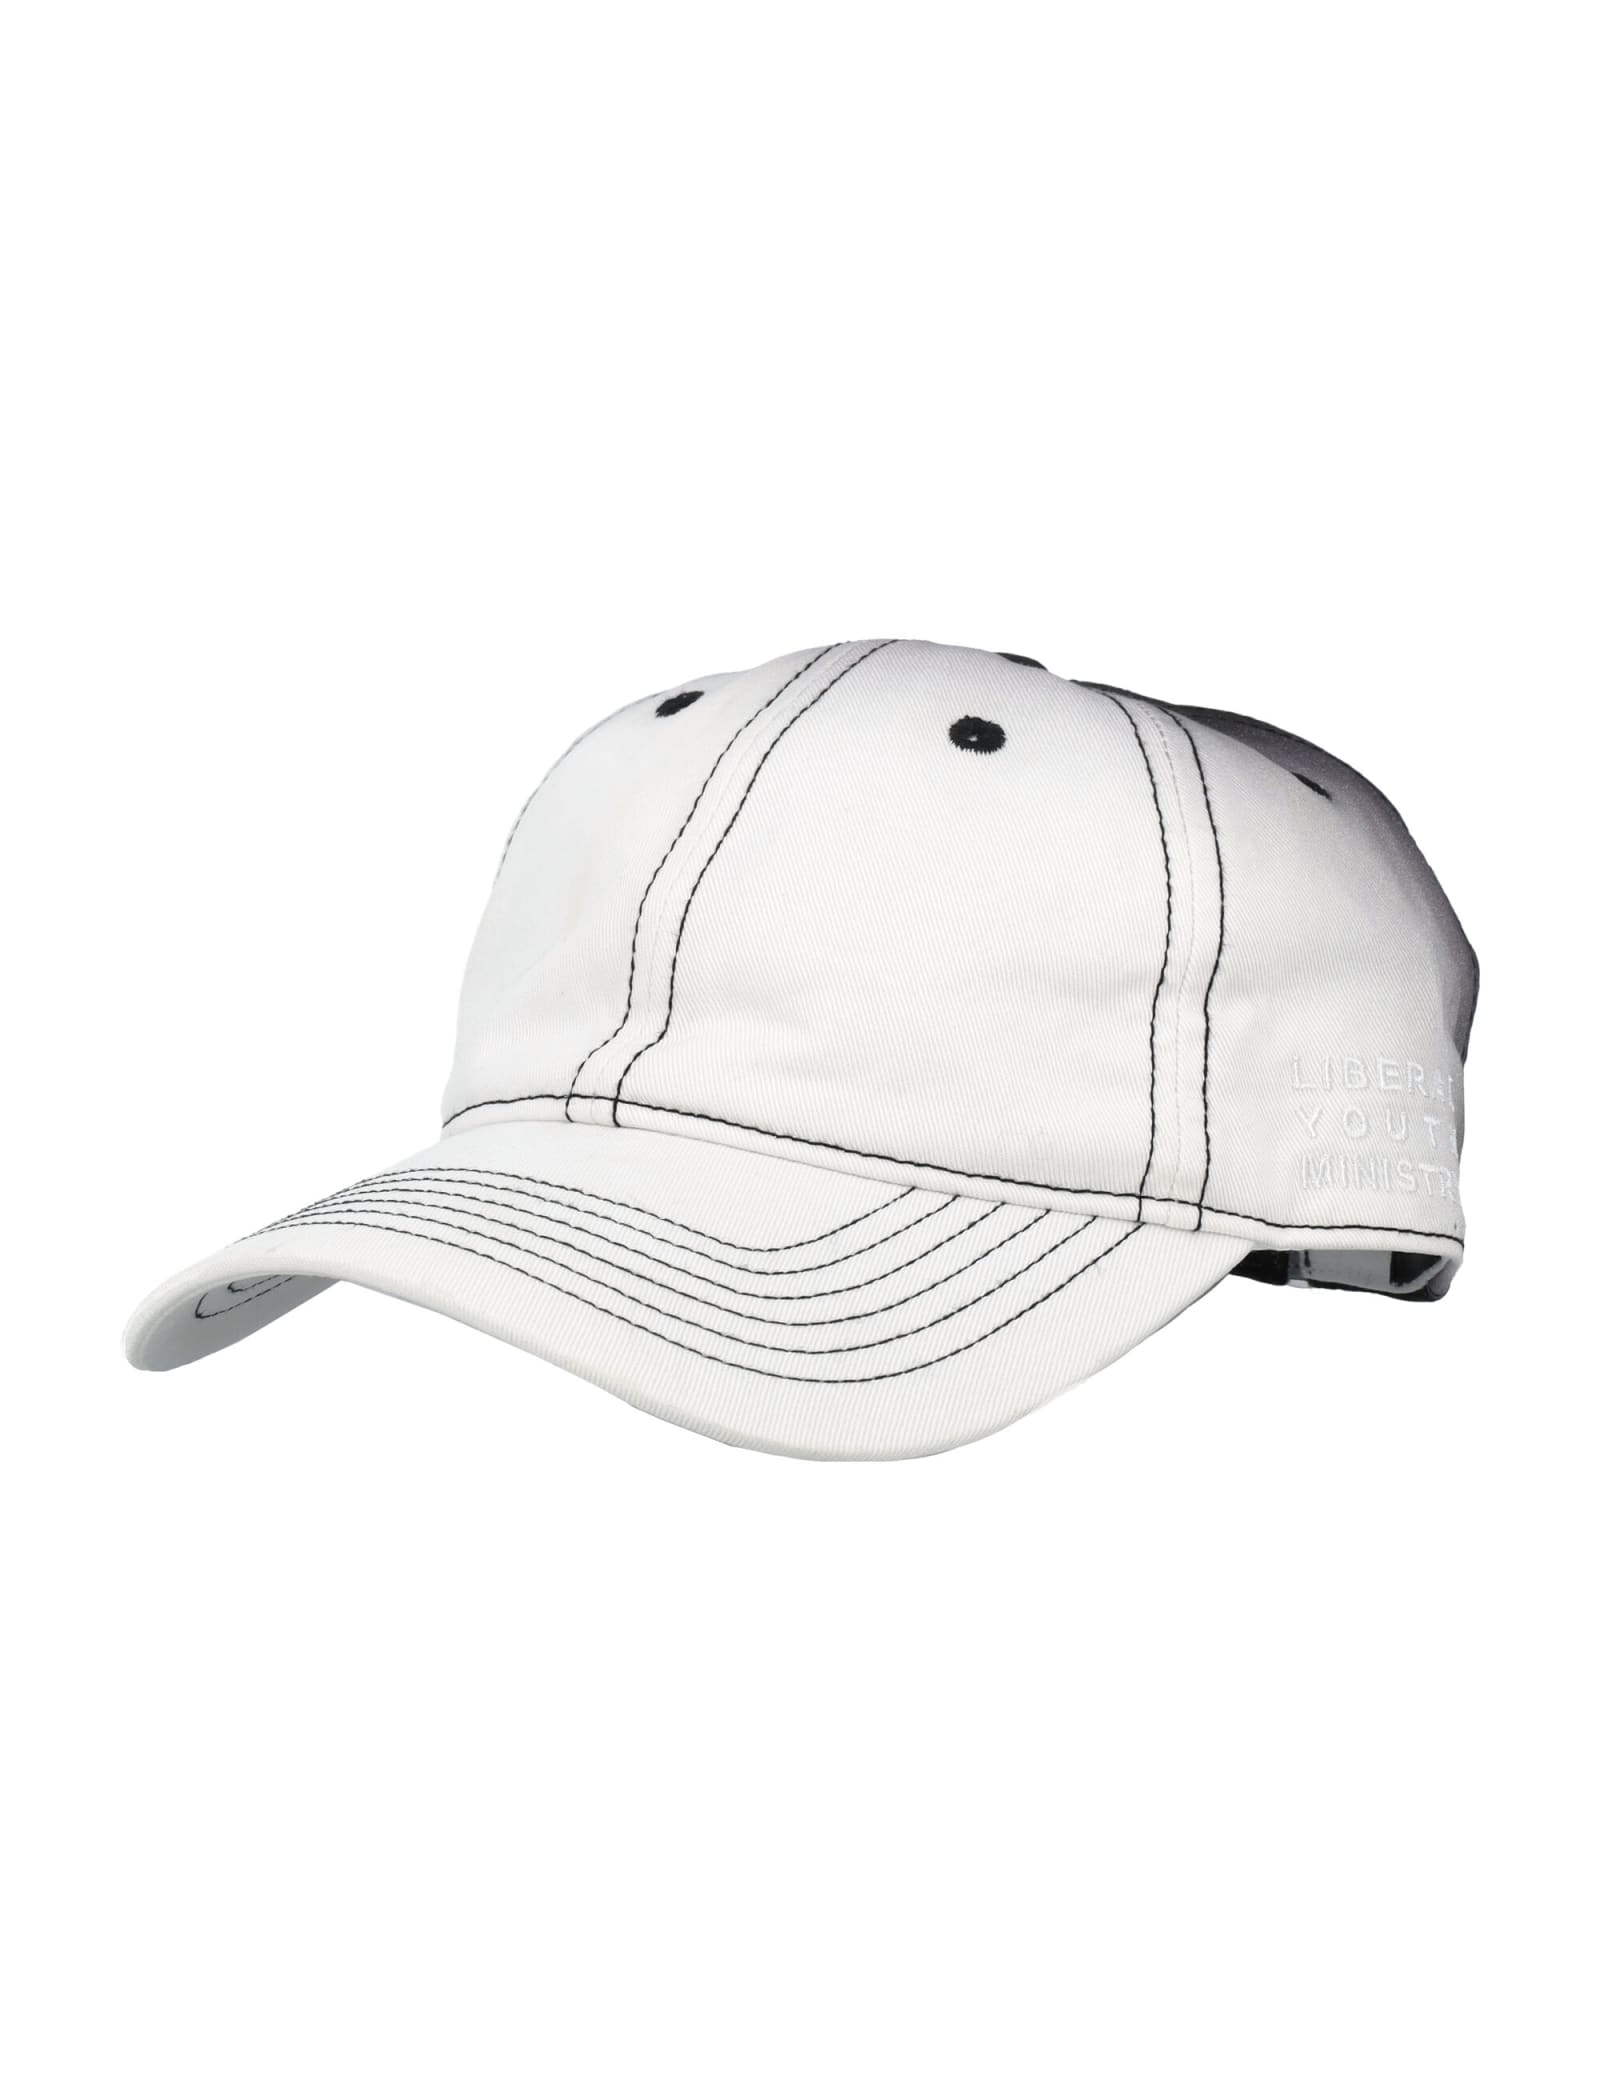 LIBERAL YOUTH MINISTRY LOGO CAP